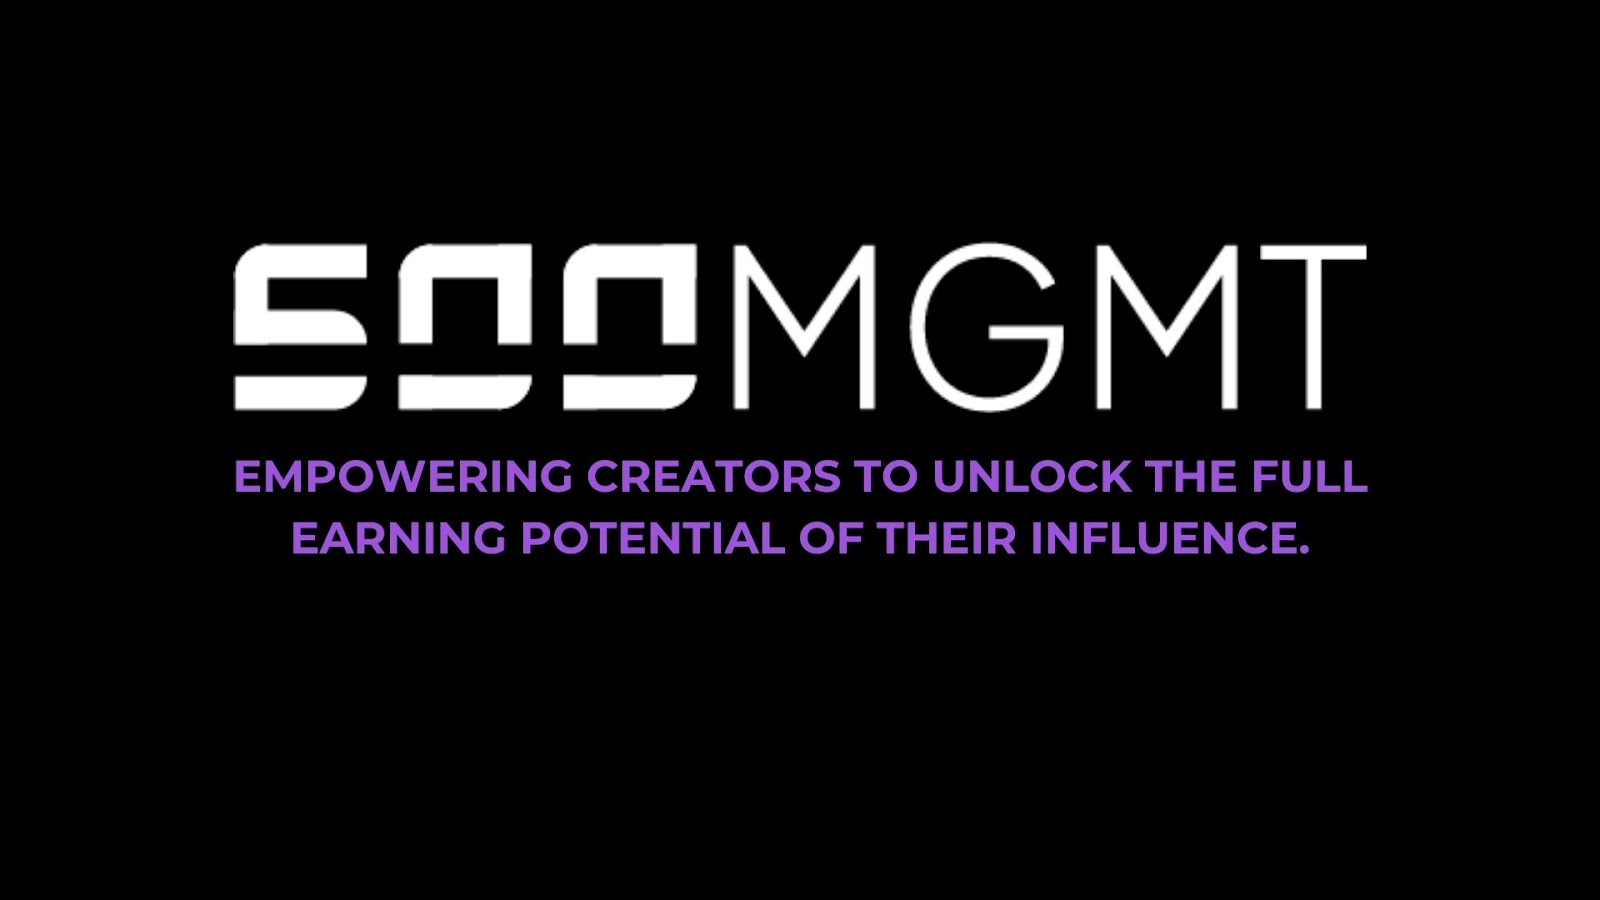 500 MGMT's Innovative Approach: Tailoring Long-Term Growth And Monetization Strategies For Creator Success